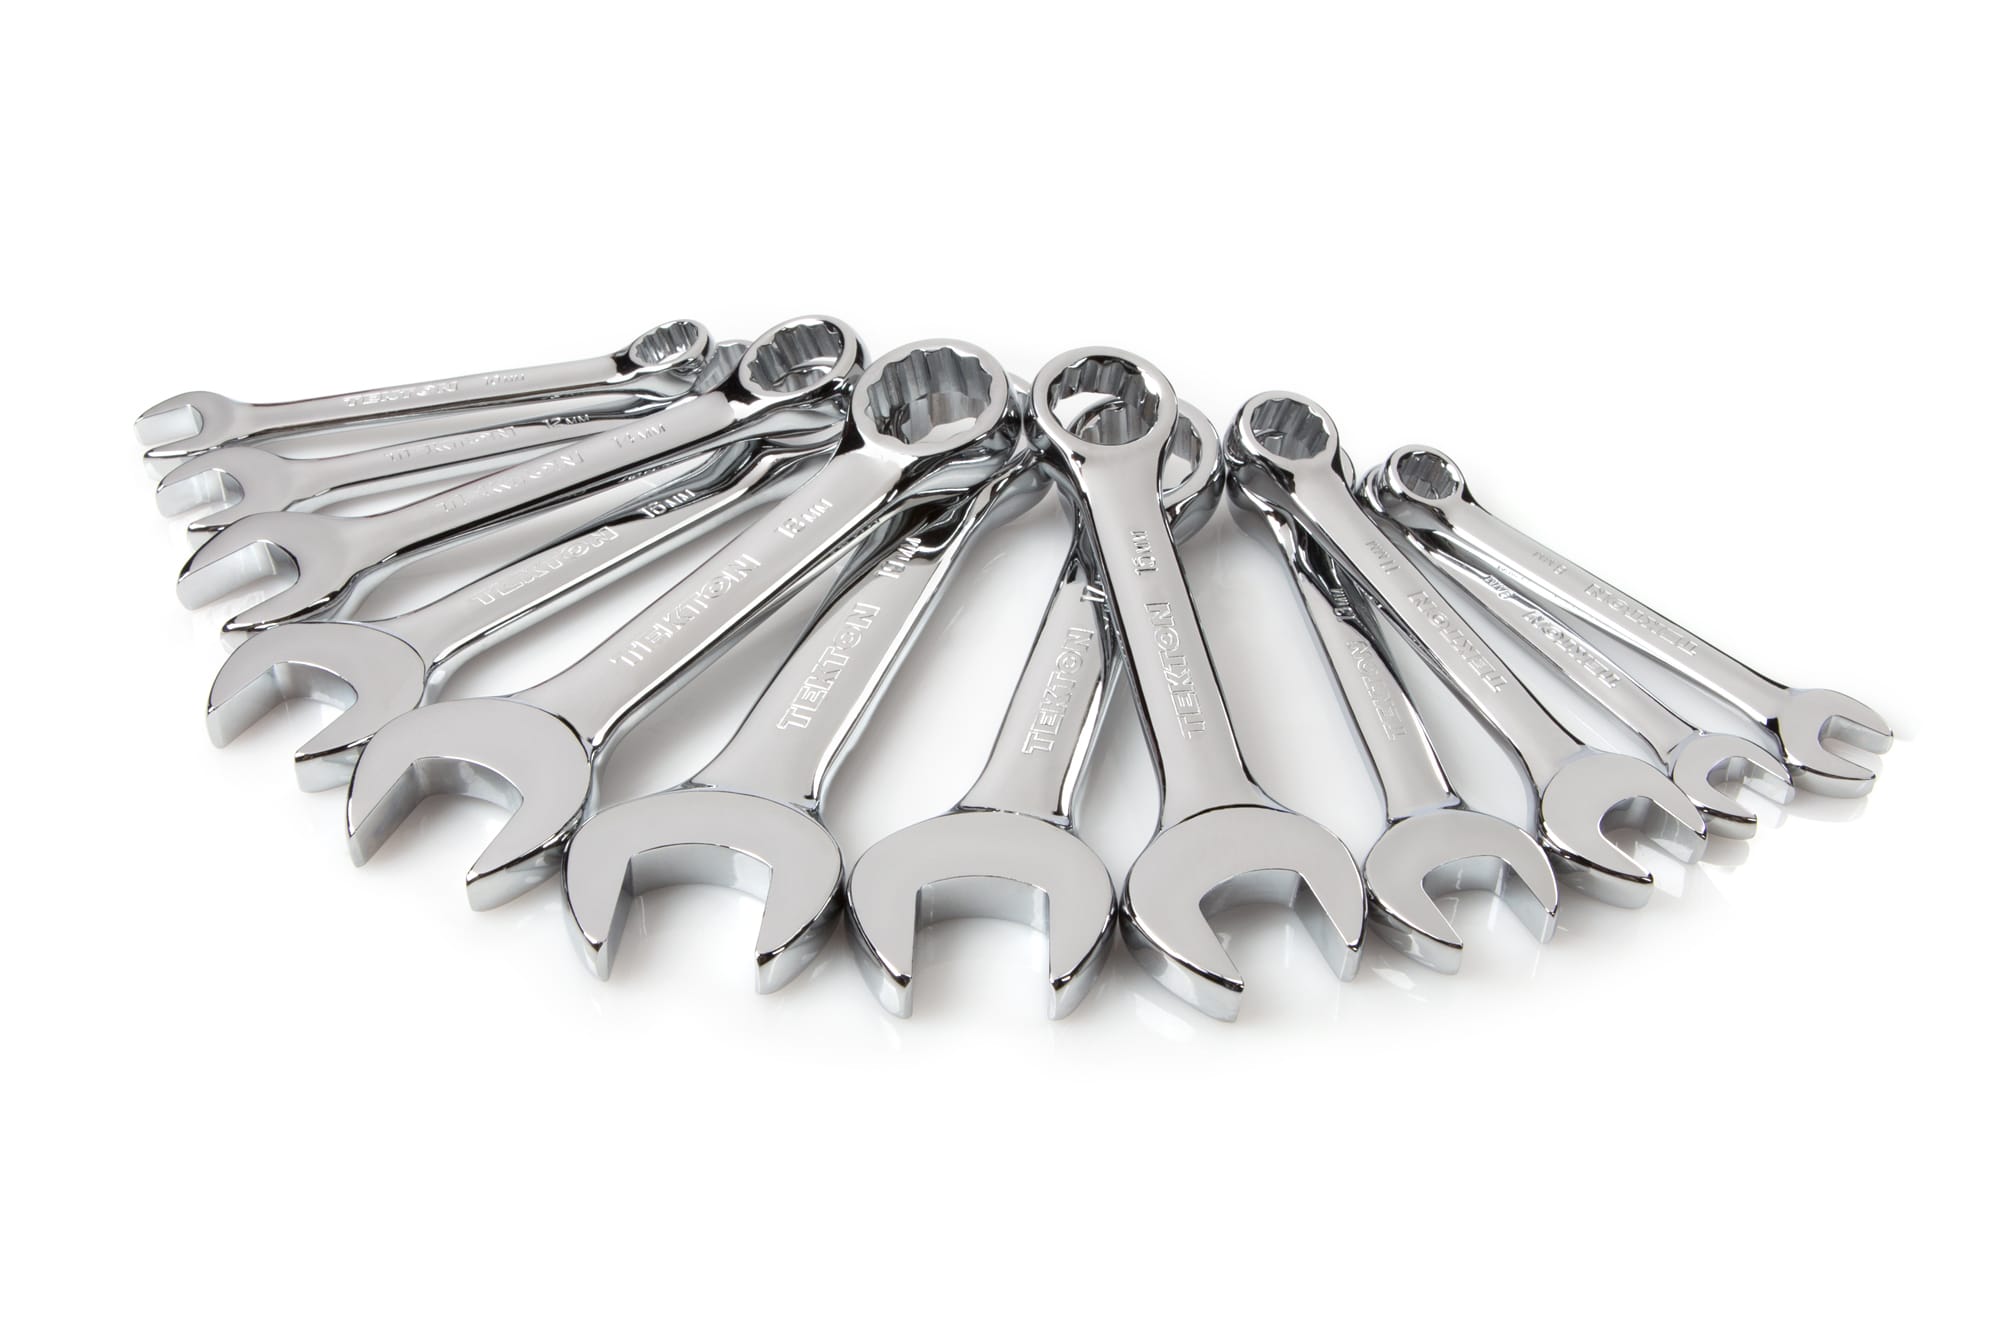 Stubby and Standard Length Combination Wrench Set, 50-Piece (Holder) |  TEKTON